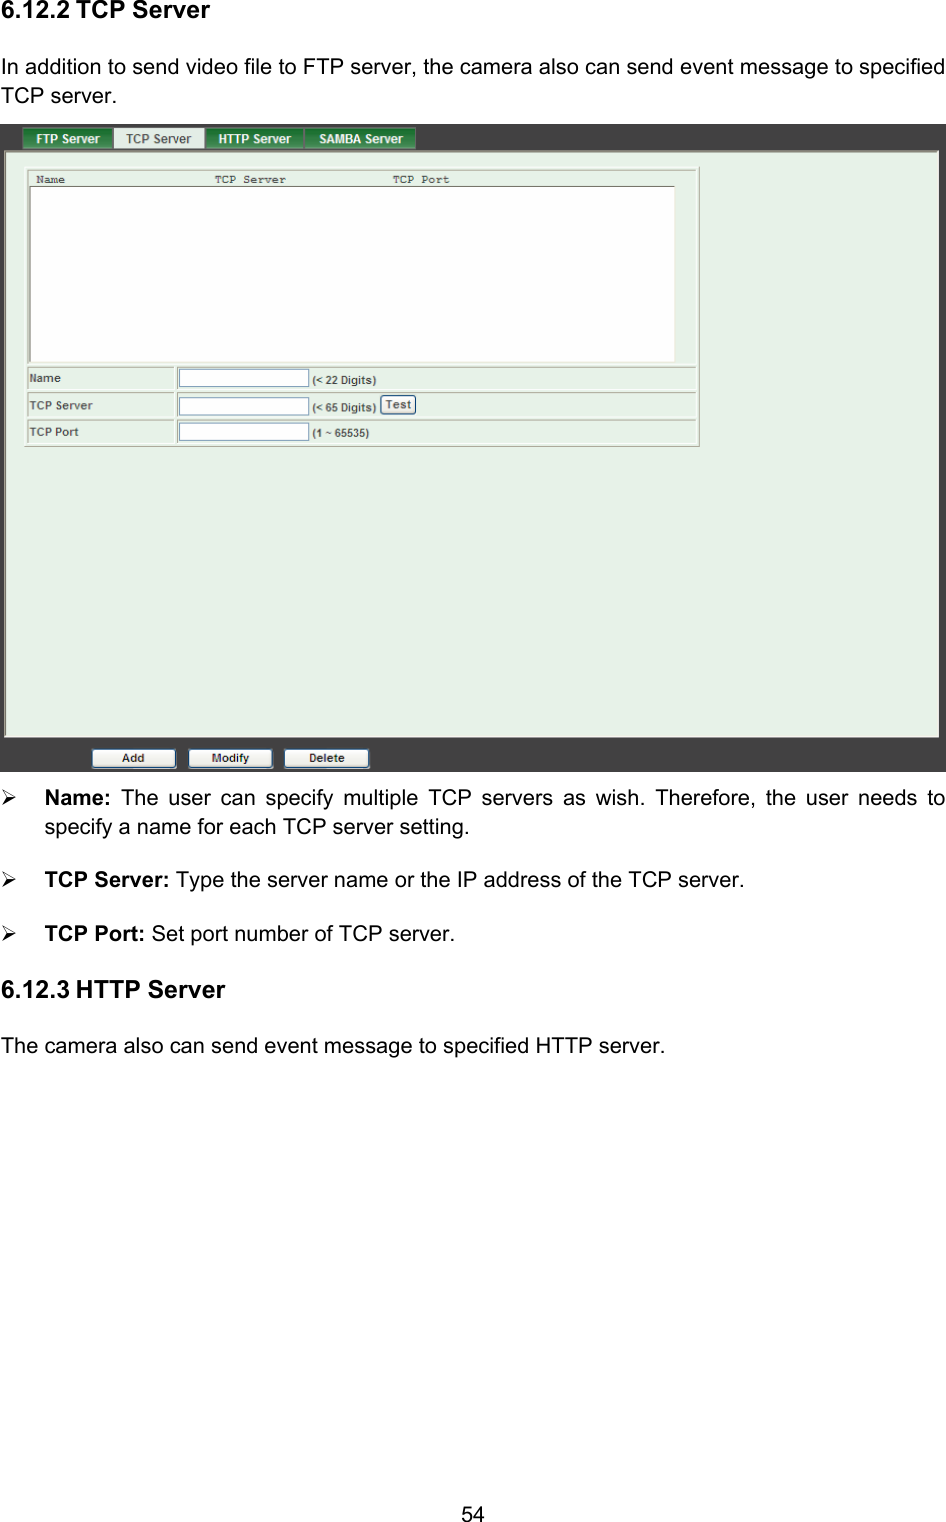  54 6.12.2 TCP Server In addition to send video file to FTP server, the camera also can send event message to specified TCP server.  ¾ Name:  The user can specify multiple TCP servers as wish. Therefore, the user needs to specify a name for each TCP server setting.   ¾ TCP Server: Type the server name or the IP address of the TCP server.   ¾ TCP Port: Set port number of TCP server.   6.12.3 HTTP Server The camera also can send event message to specified HTTP server. 